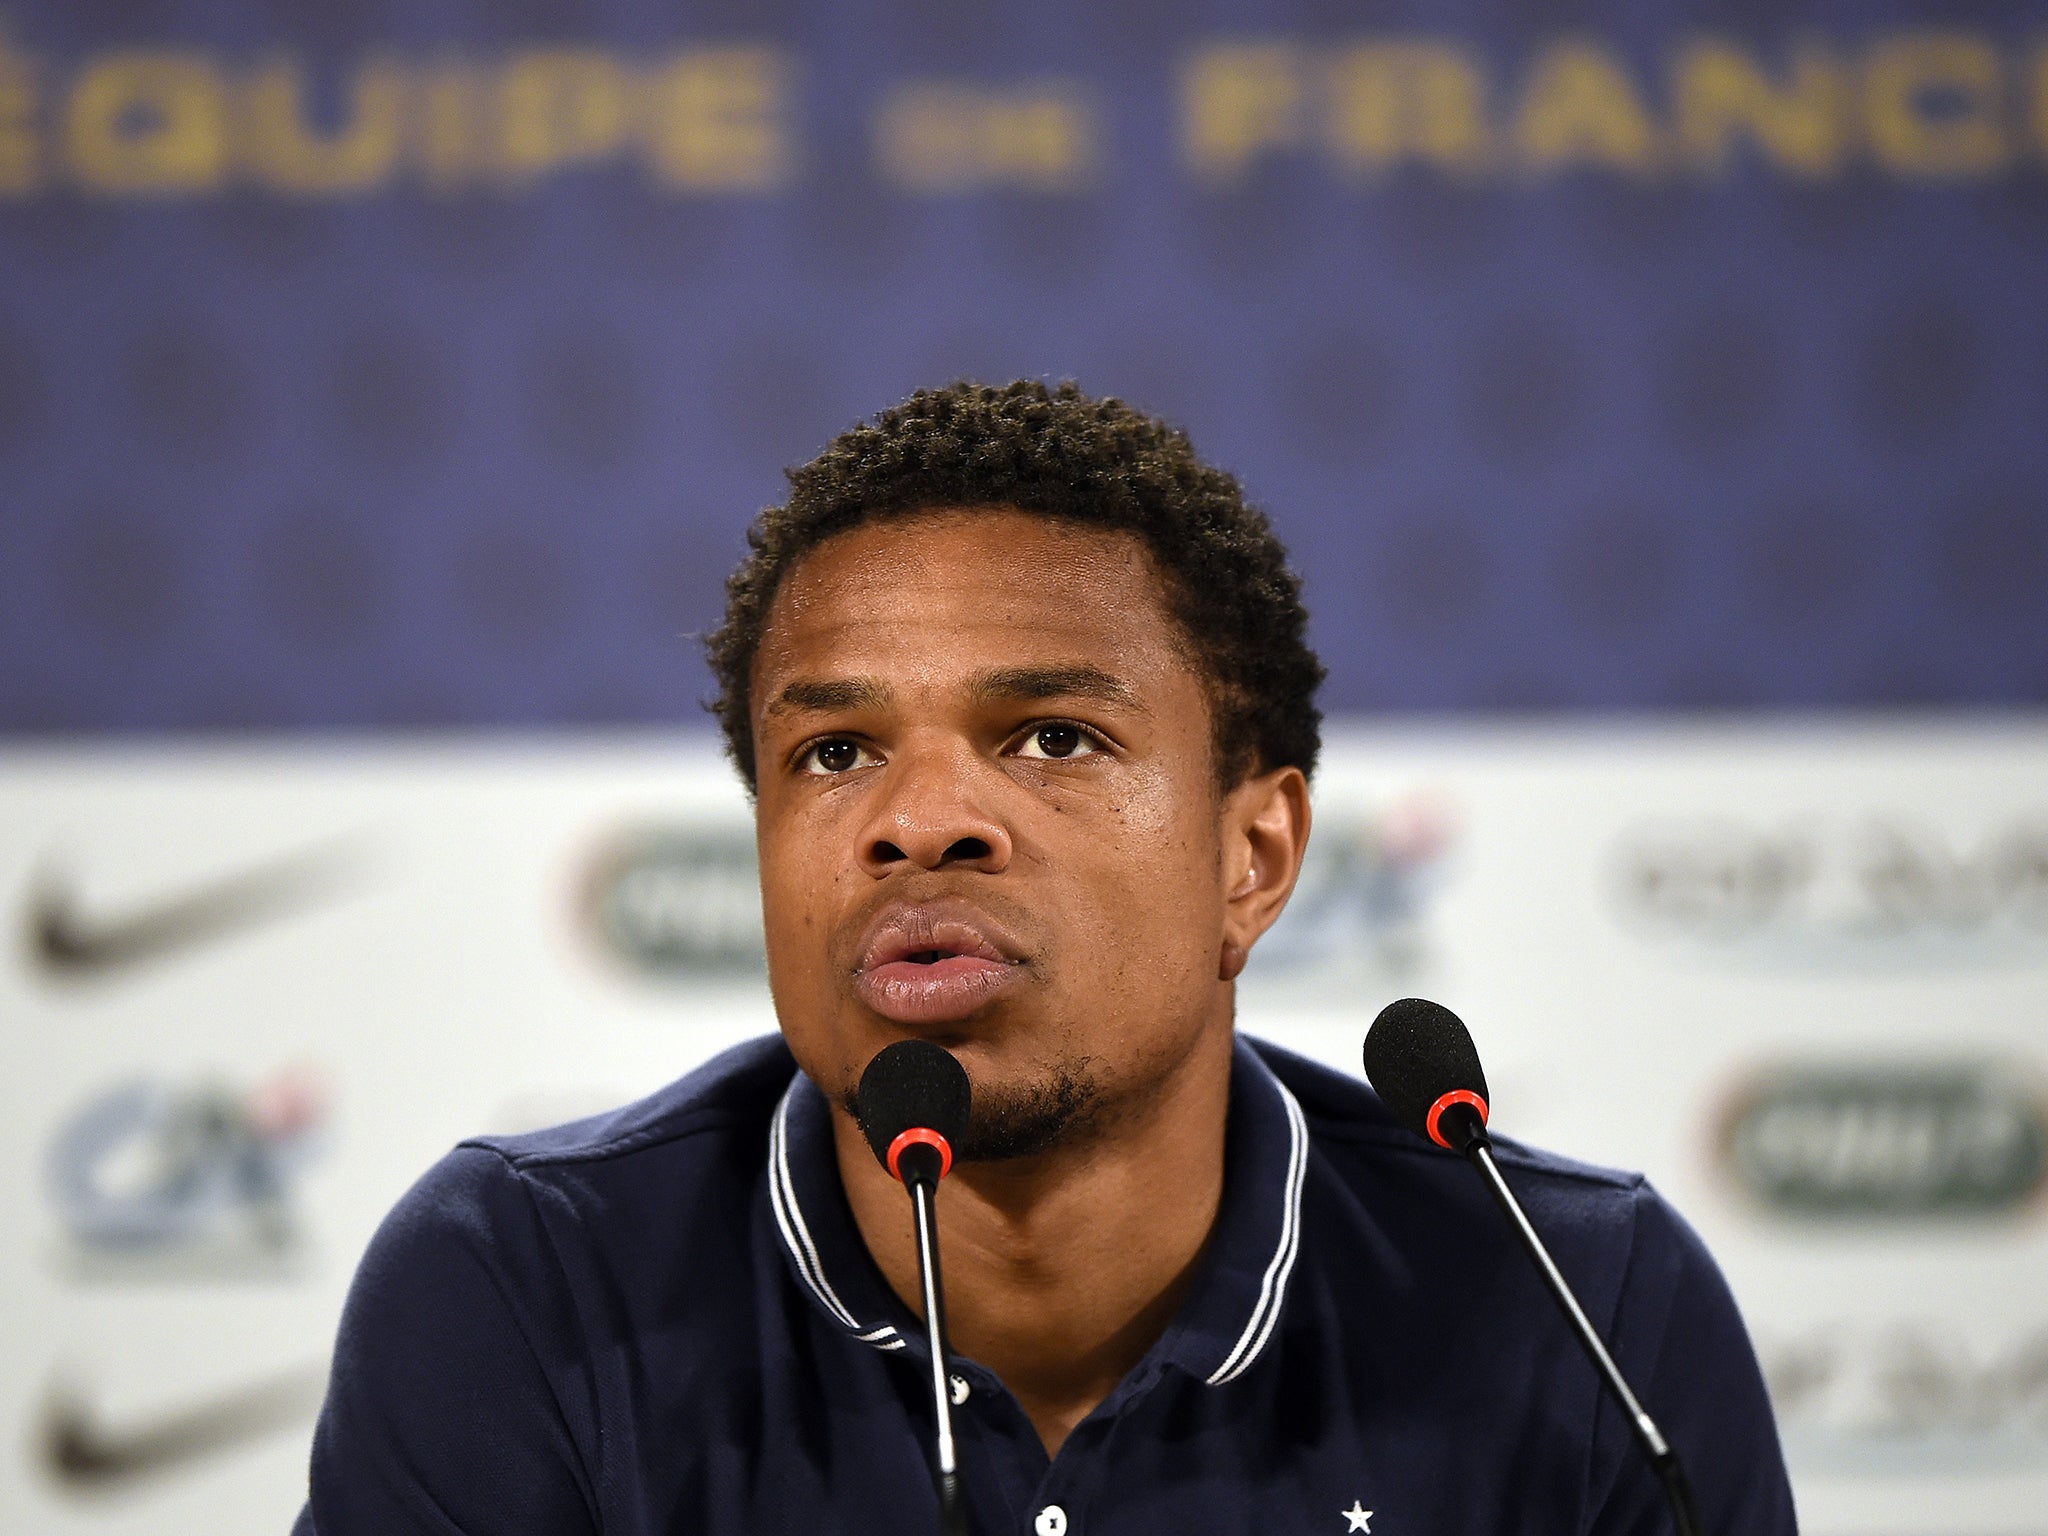 QPR striker Loic Remy has reportedly opted for Chelsea over Arsenal